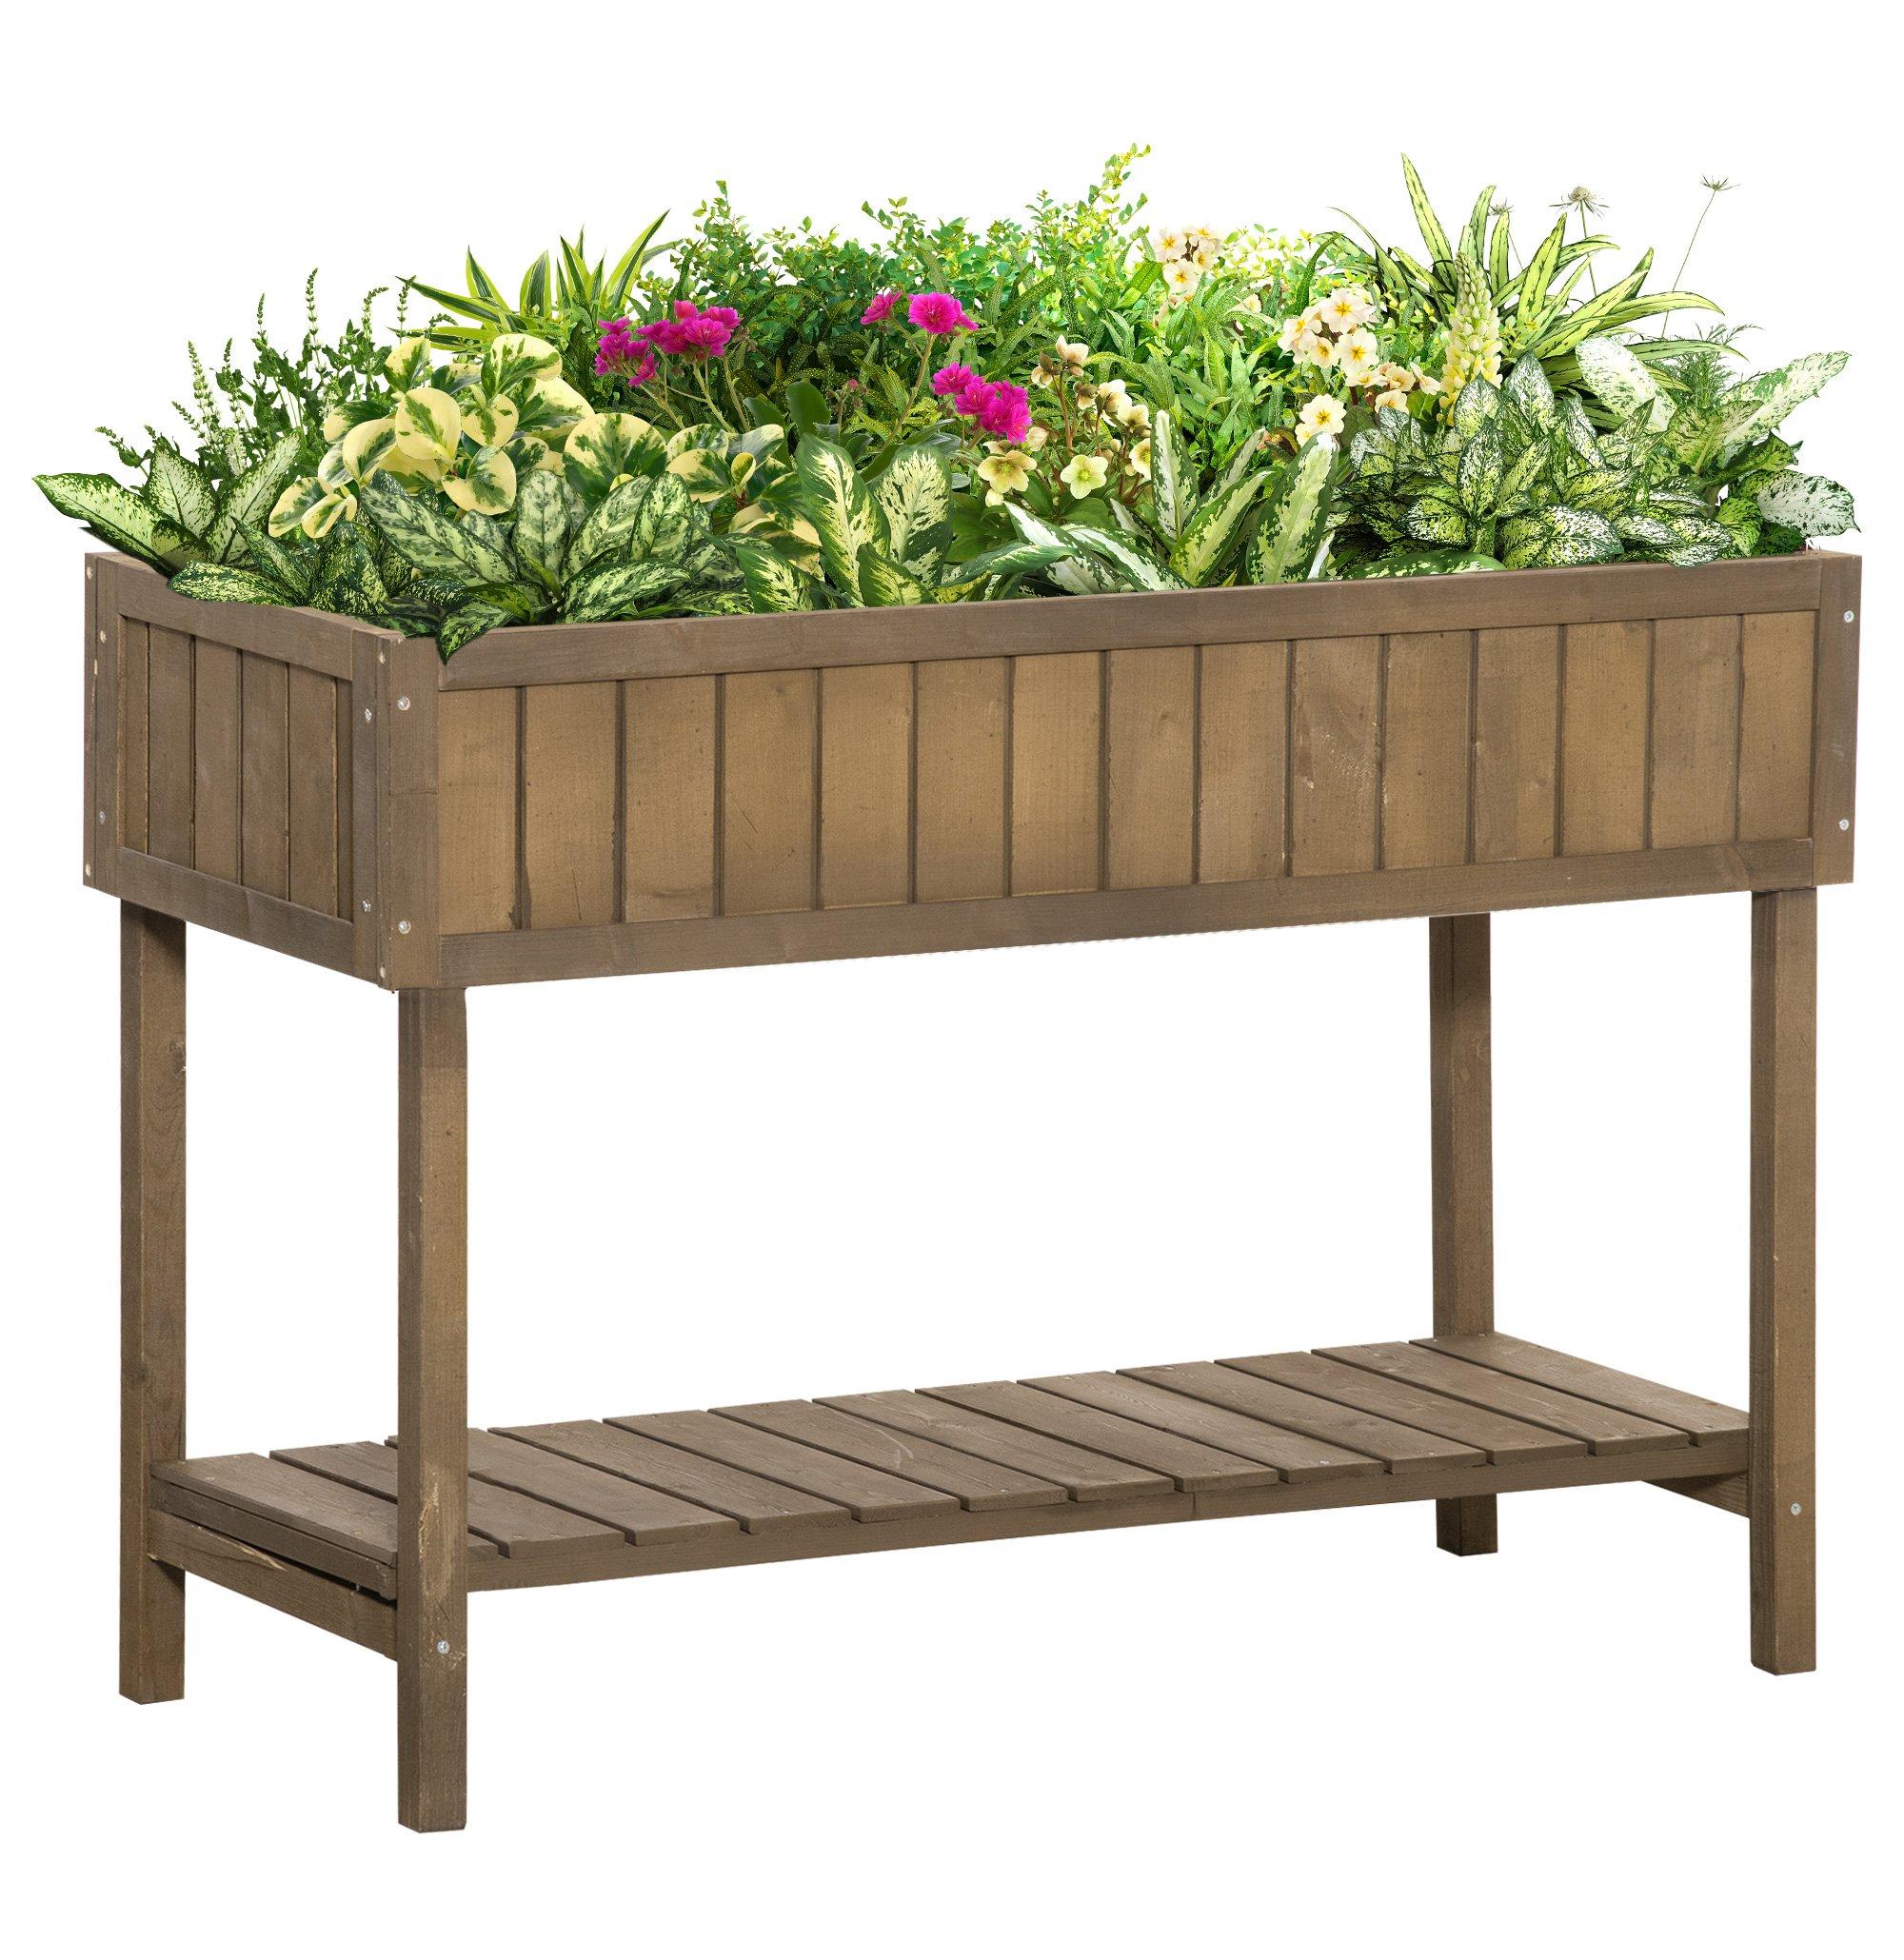 Wooden Herb Planter Stand 8 Cubes Bottom Shelf Raised Bed